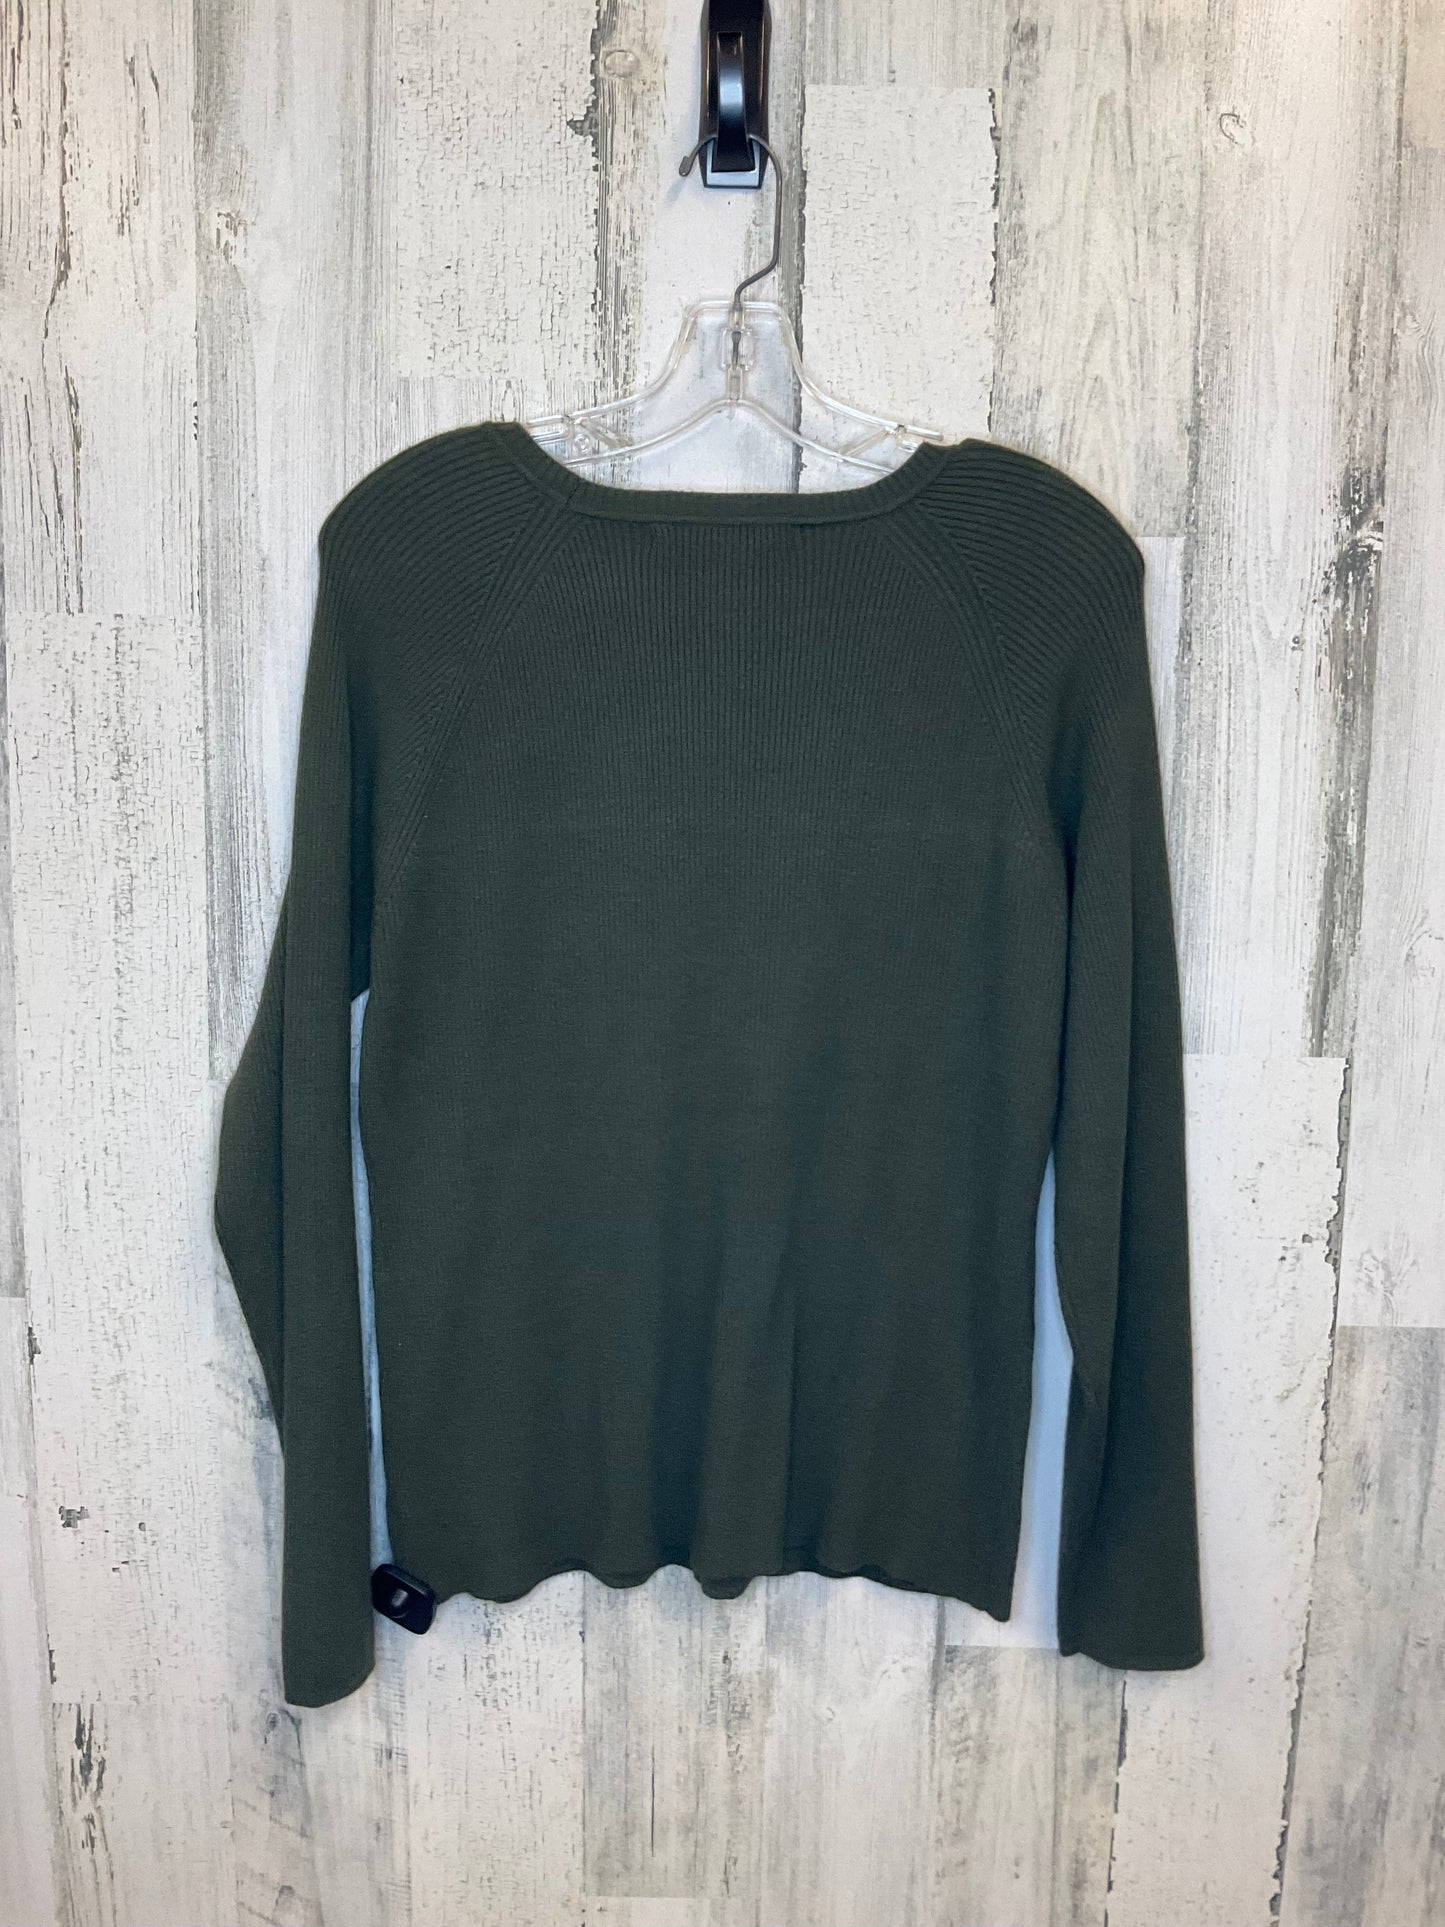 Top Long Sleeve By Marc New York  Size: Xl